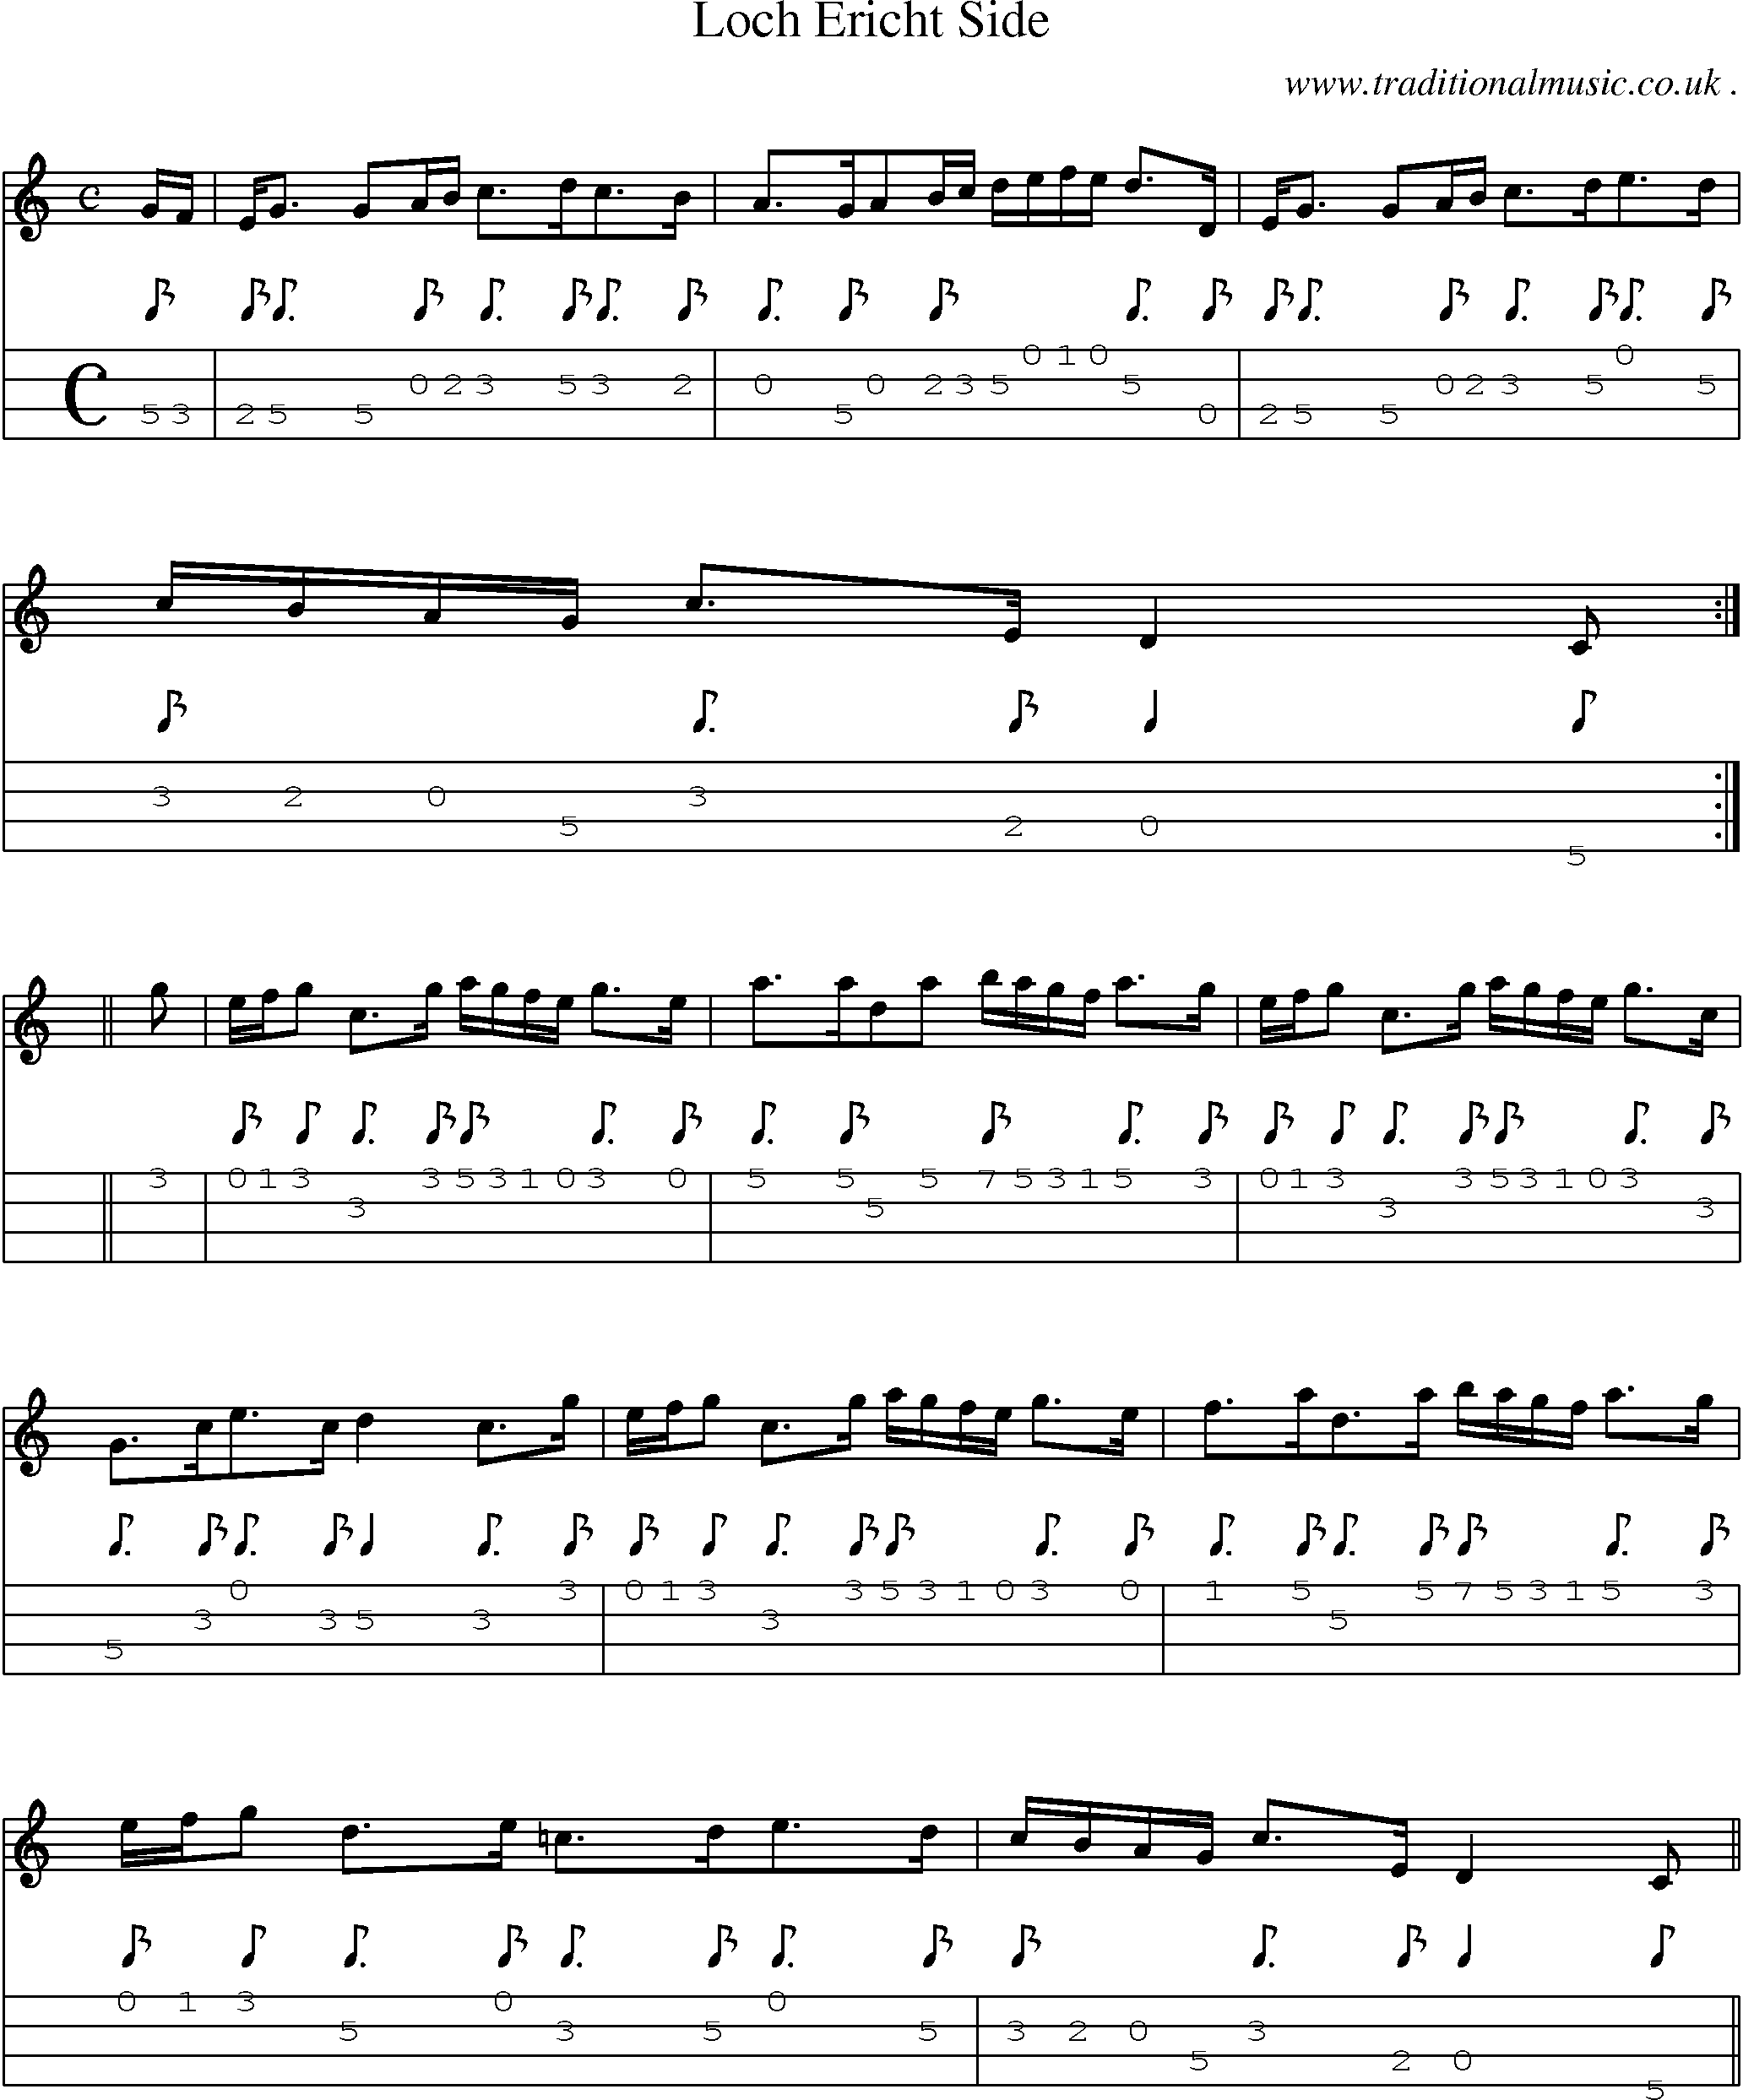 Sheet-music  score, Chords and Mandolin Tabs for Loch Ericht Side